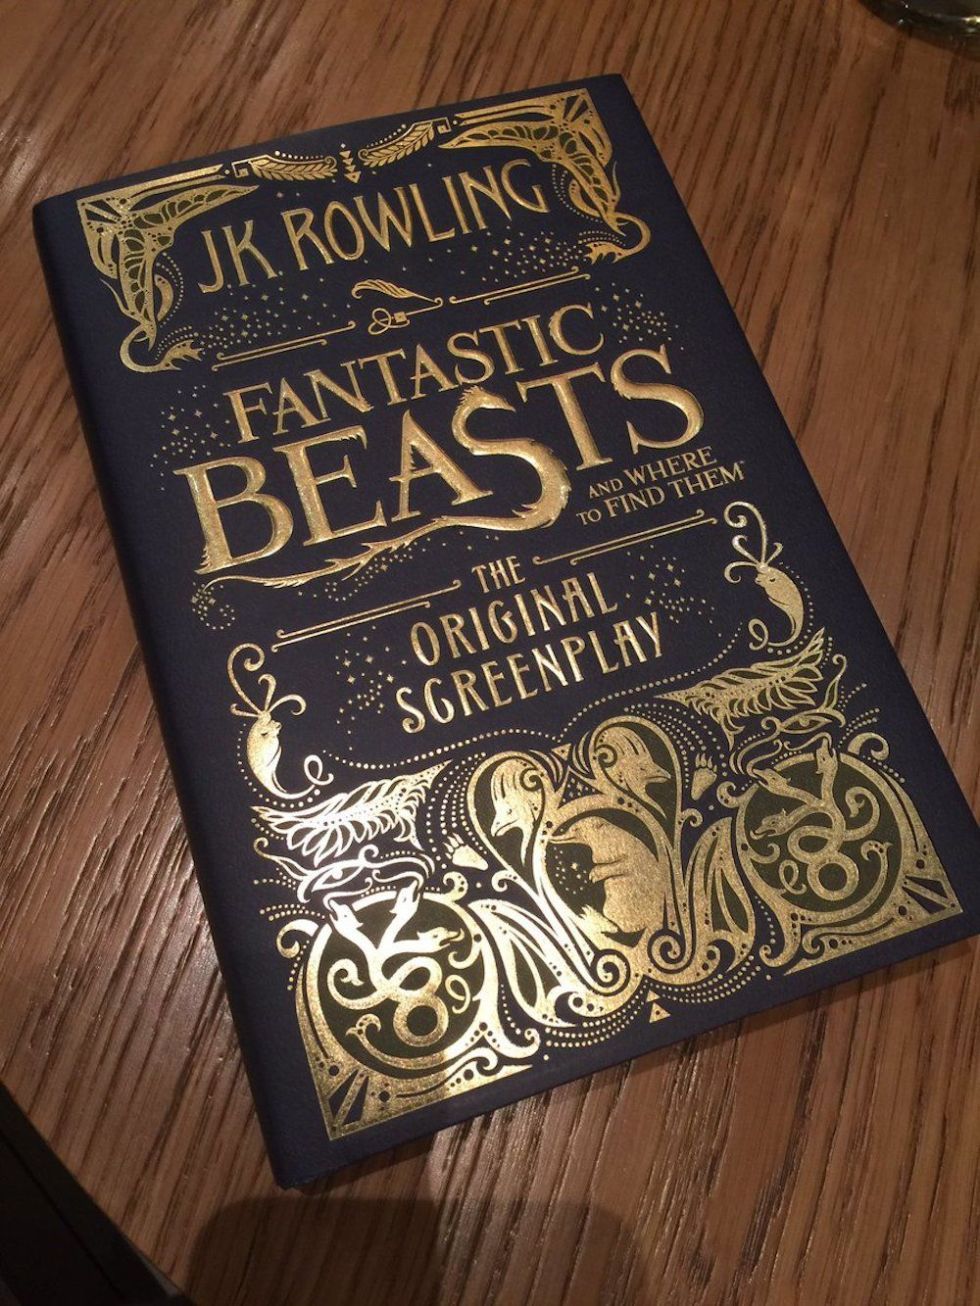 fantastic beasts and where to find them book series